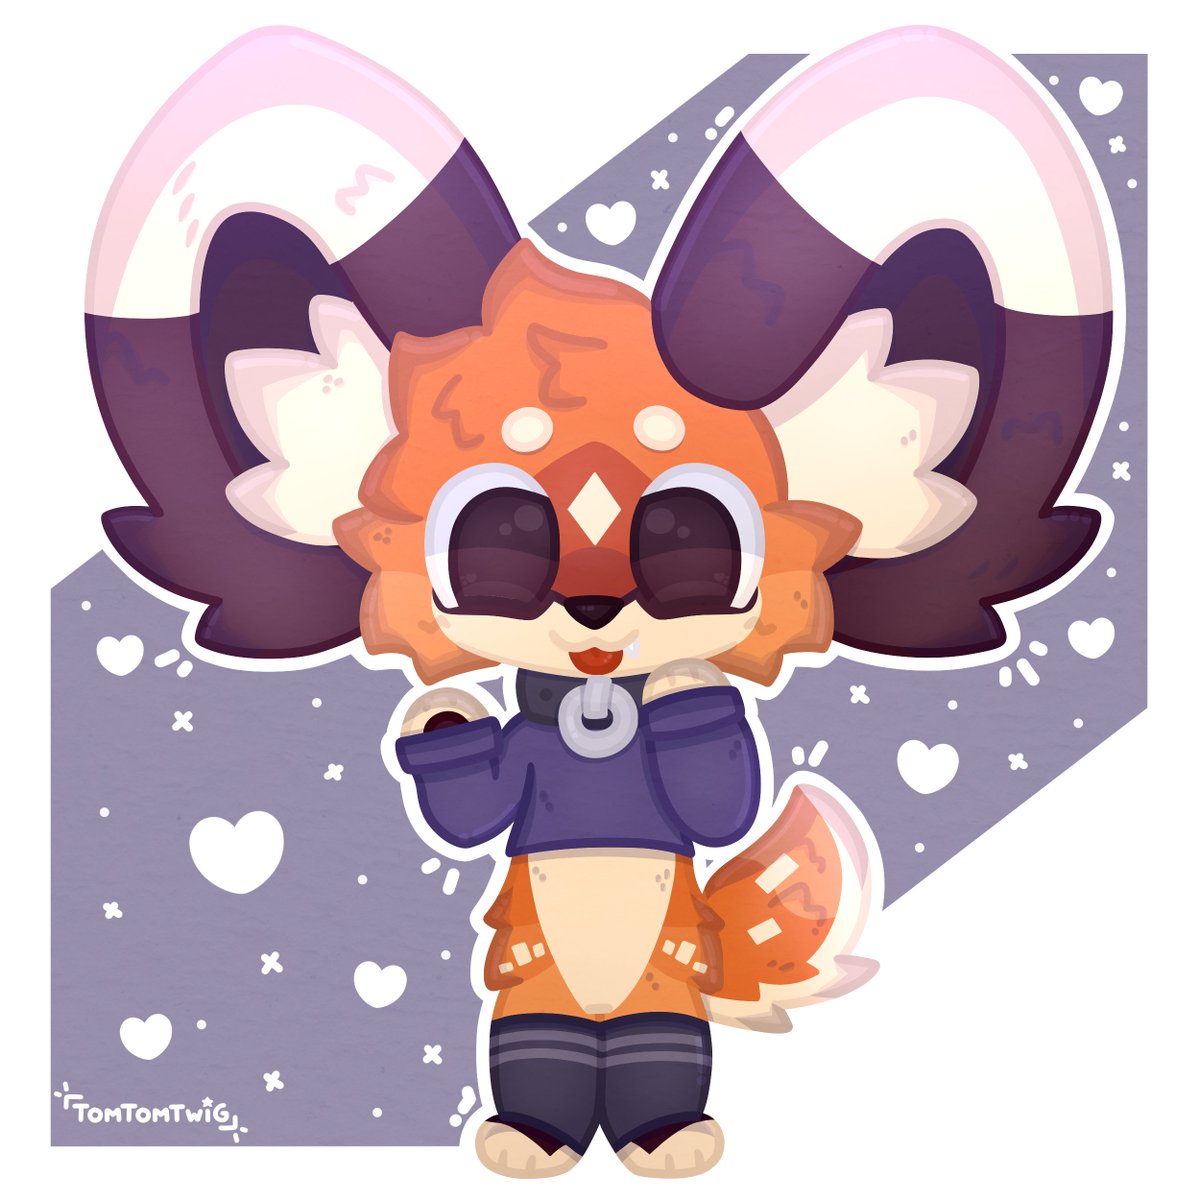 Finished my part on an art trade with @CringeLordXL !
-
-
#cuteart #drawing #cute #furryart #chibiart